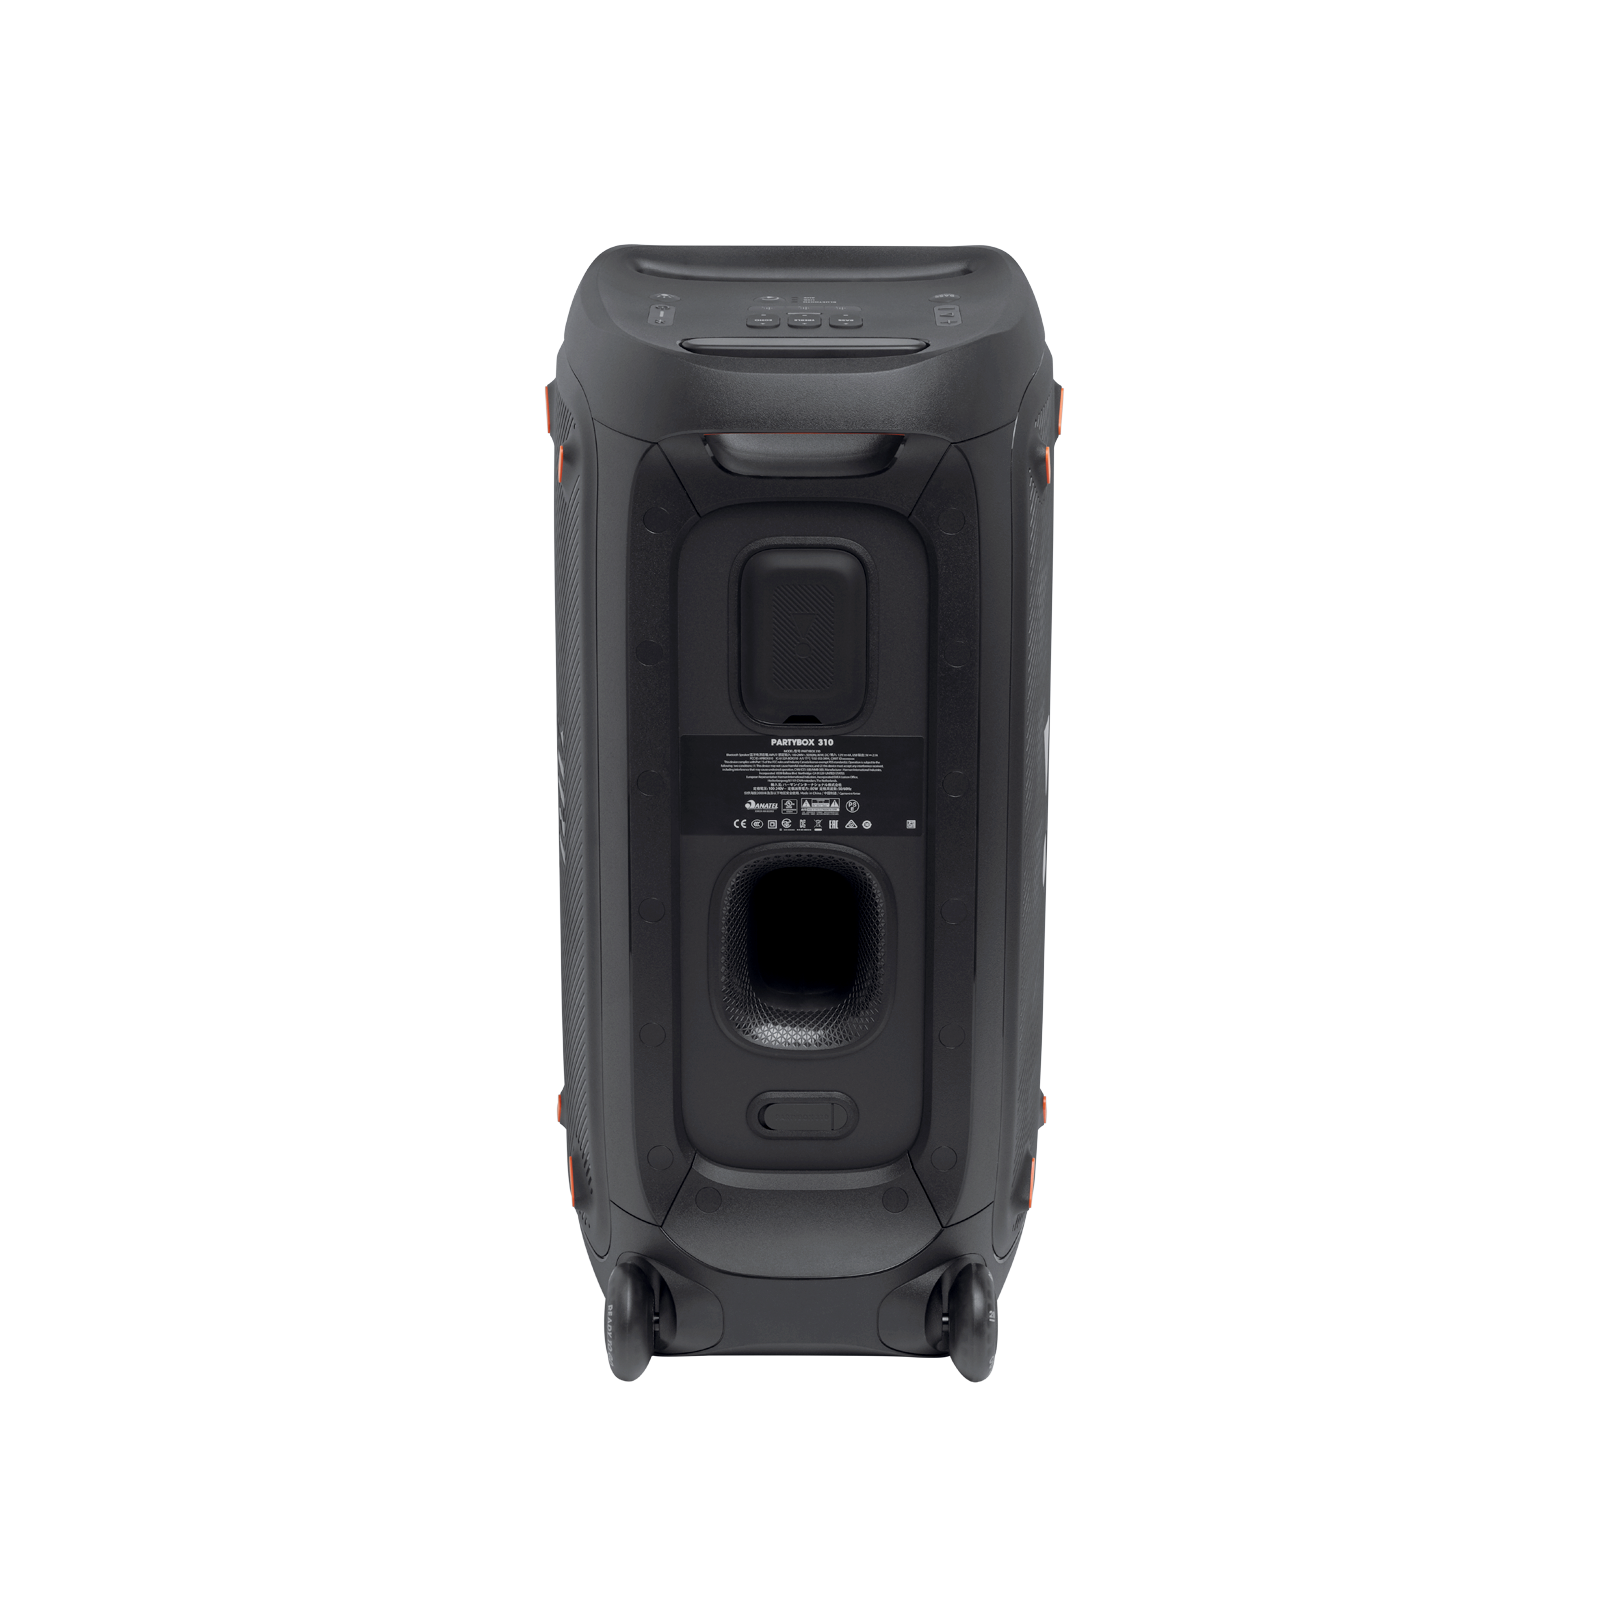 JBL Partybox 310 + Mic - Black - Portable party speaker with 240W powerful sound, built-in lightshow and wired mic - Back